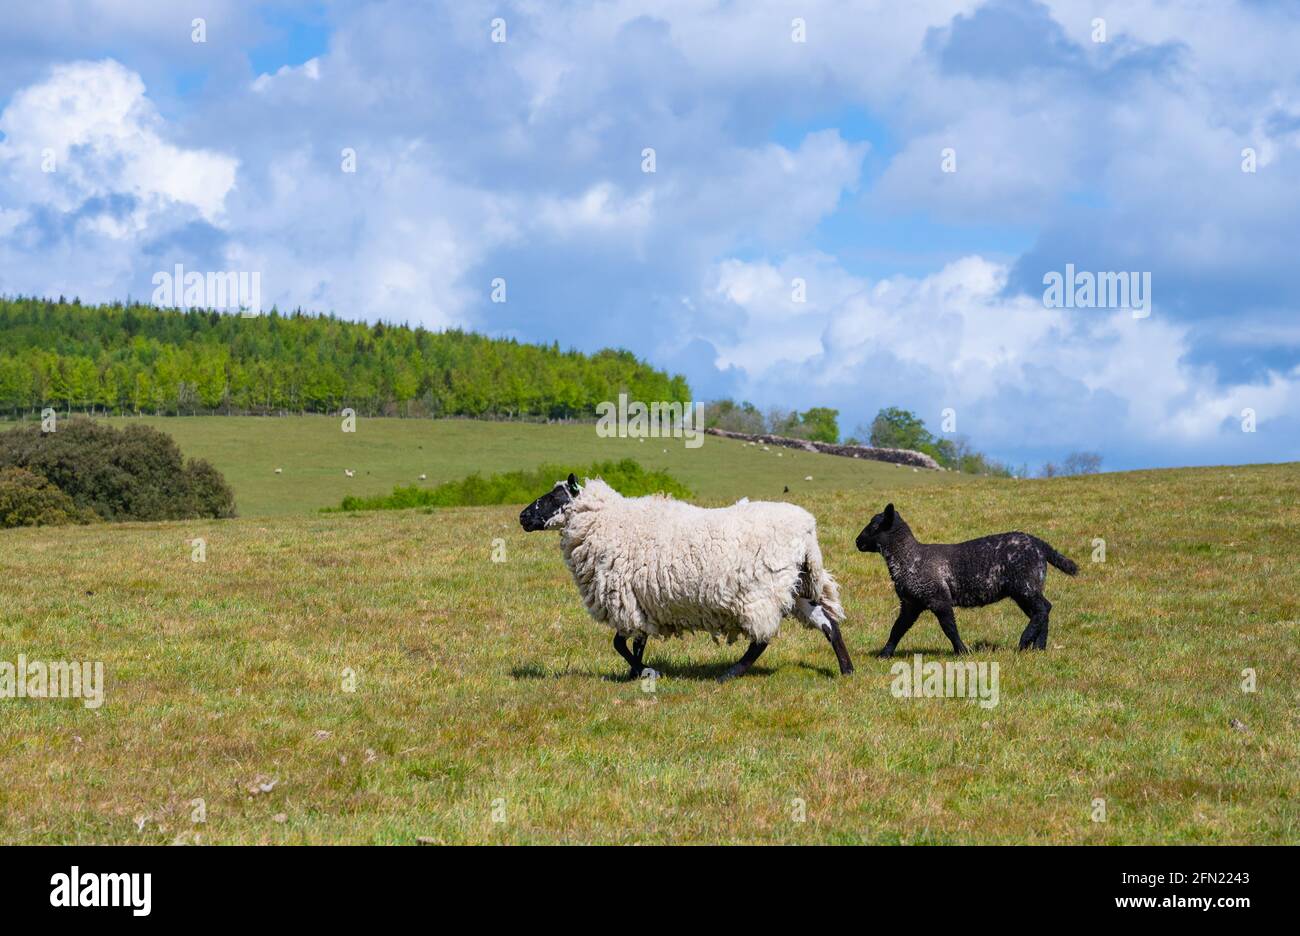 Sheep & lamb (Ovis aries) running on grass in a field in Spring in Arundel National Park on the South Downs in West Sussex, England, UK. Copy space. Stock Photo